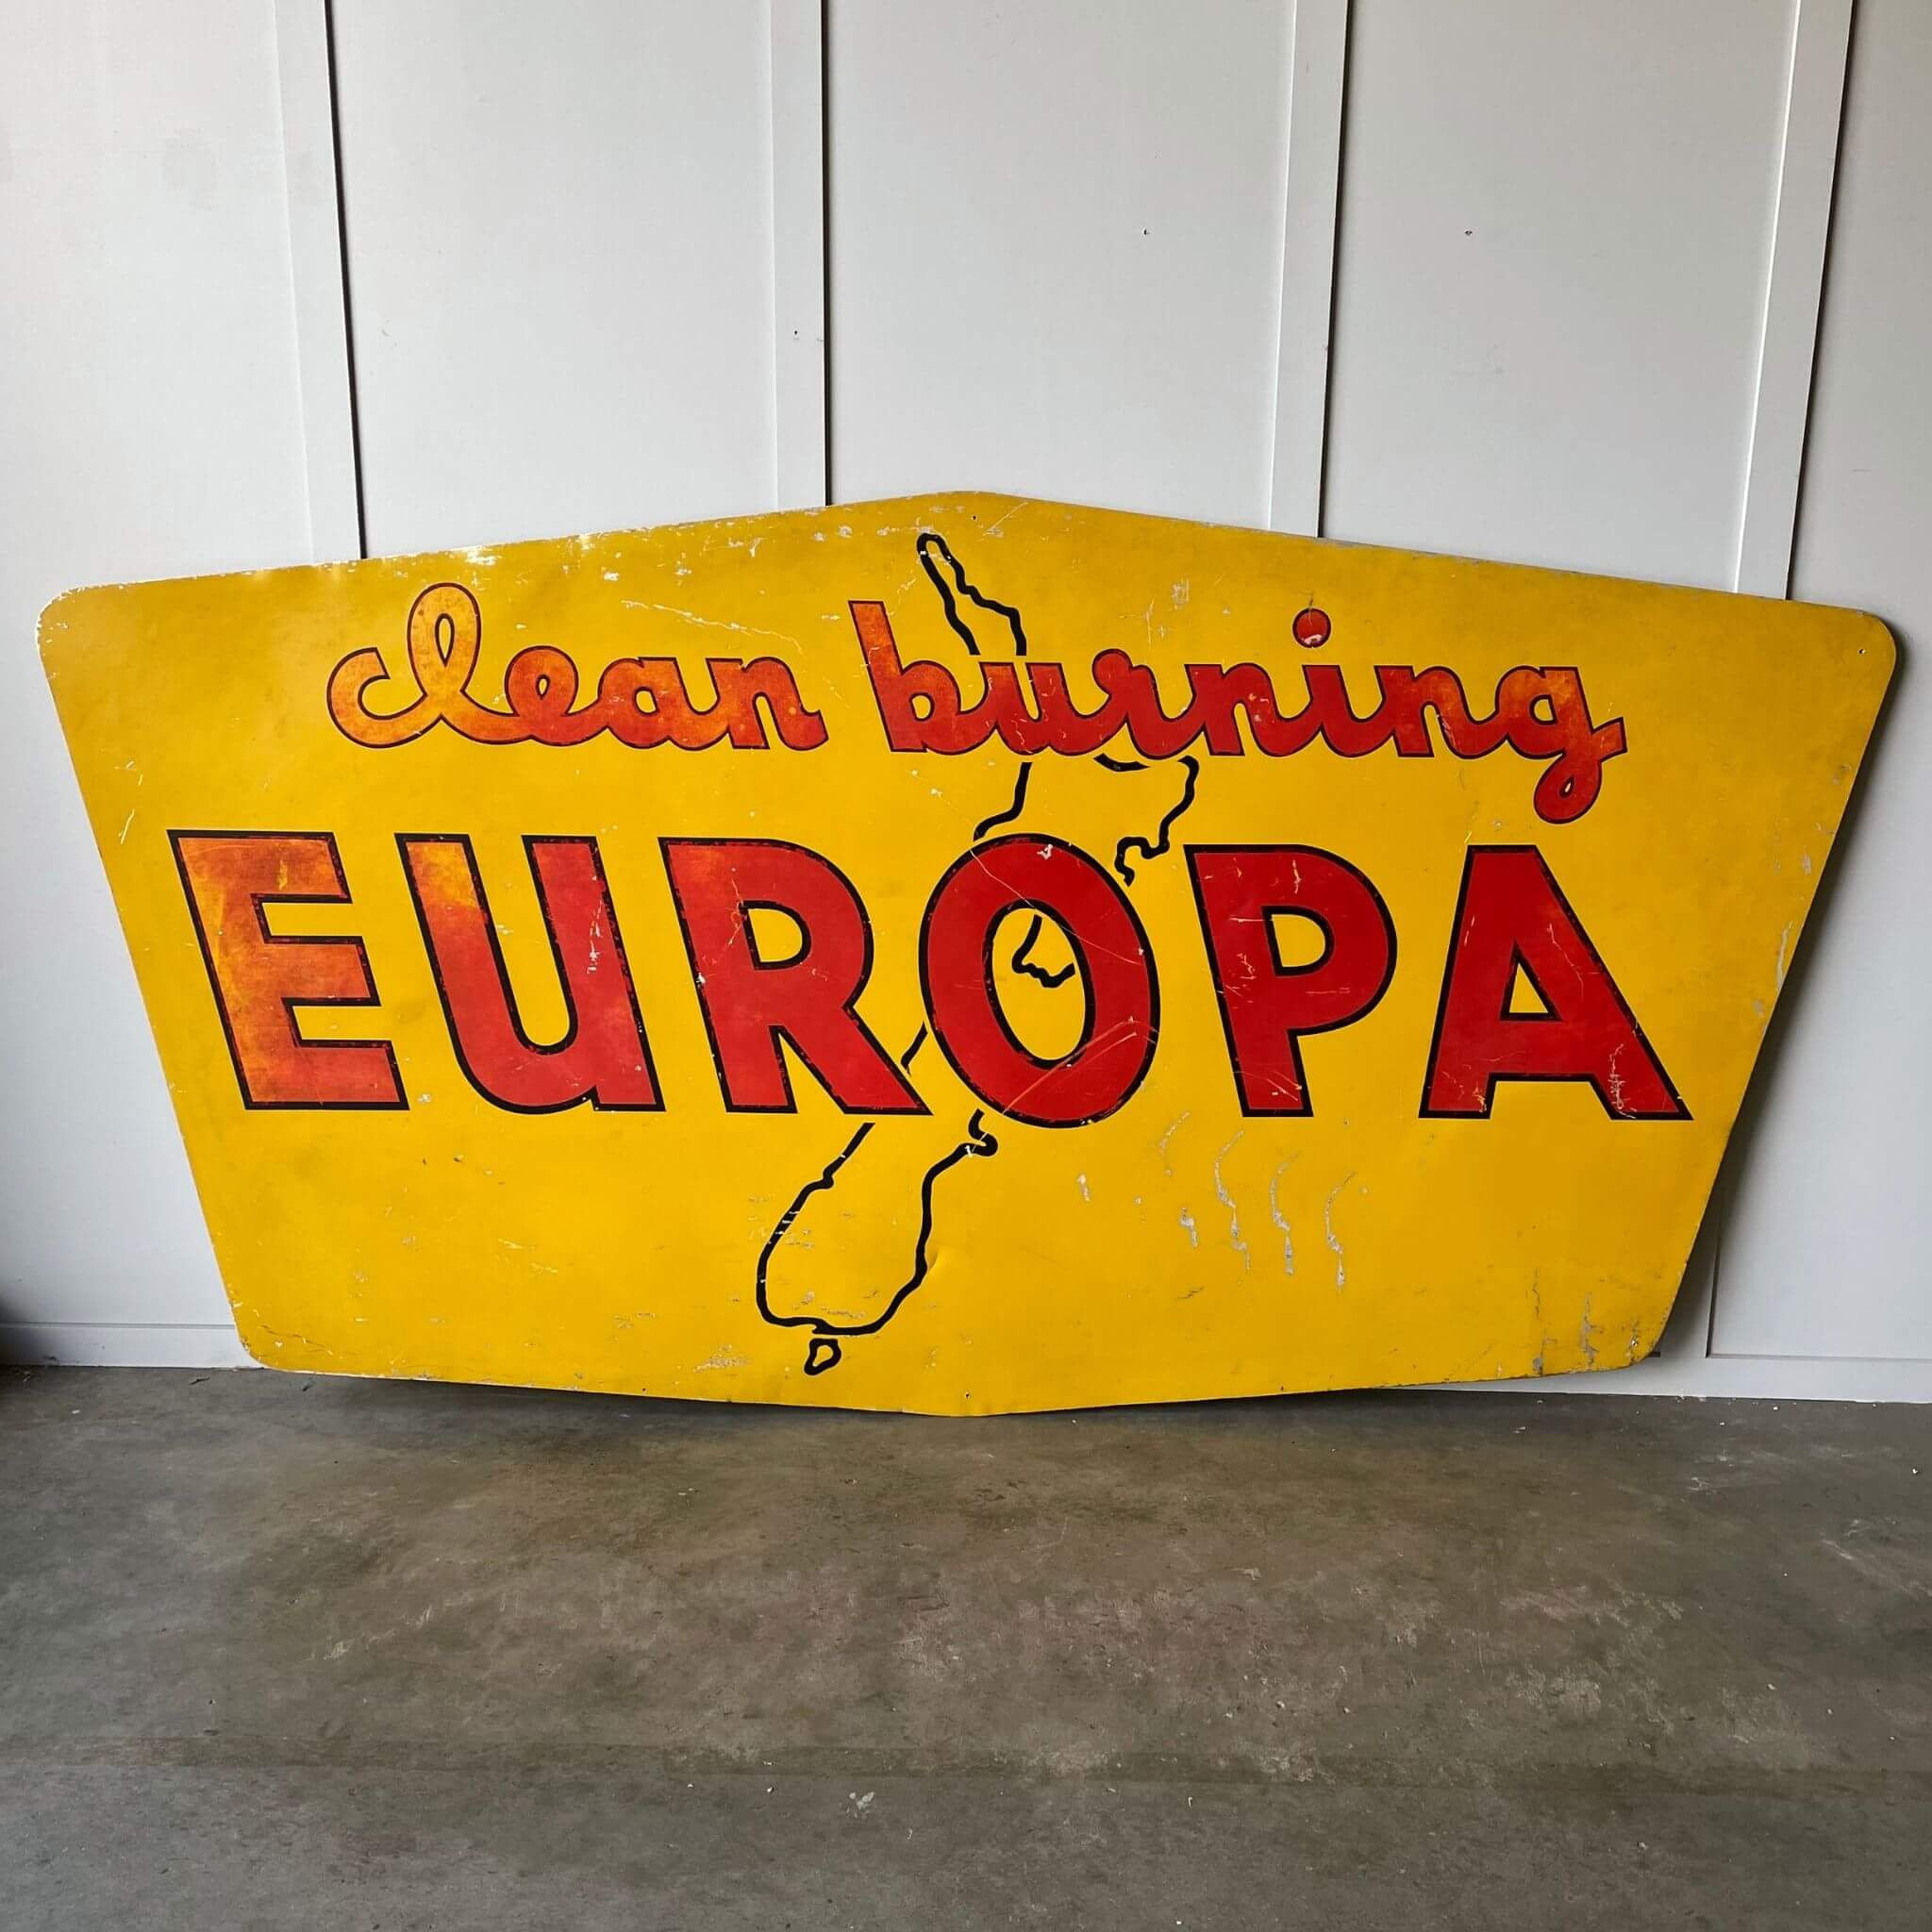 Vintage collectable Europa clean burning petrol station sign